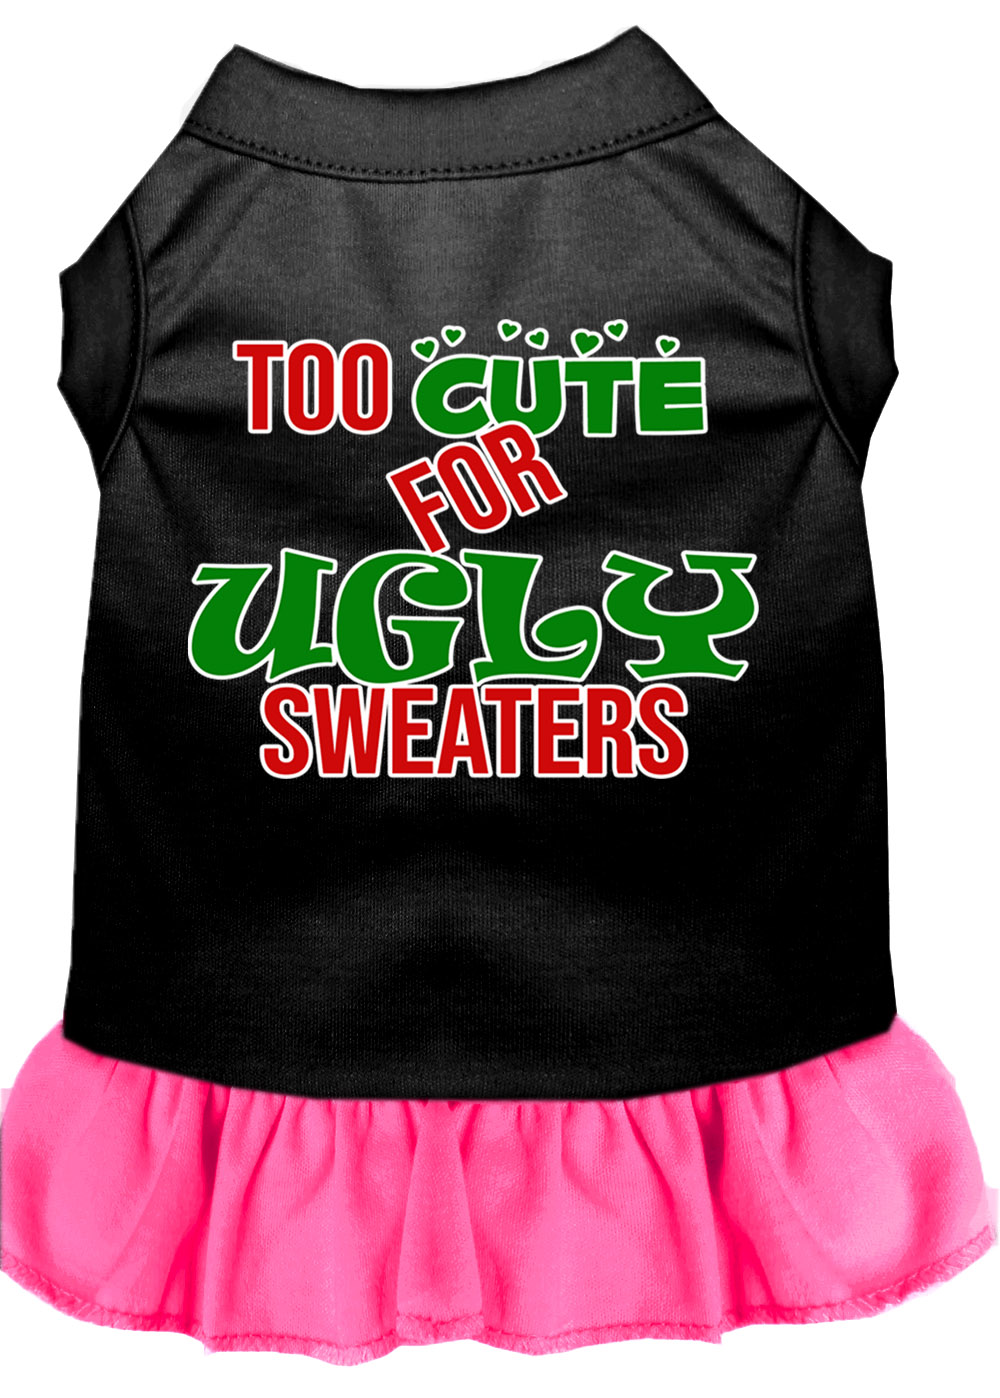 Too Cute for Ugly Sweaters Screen Print Dog Dress Black with Bright Pink Lg